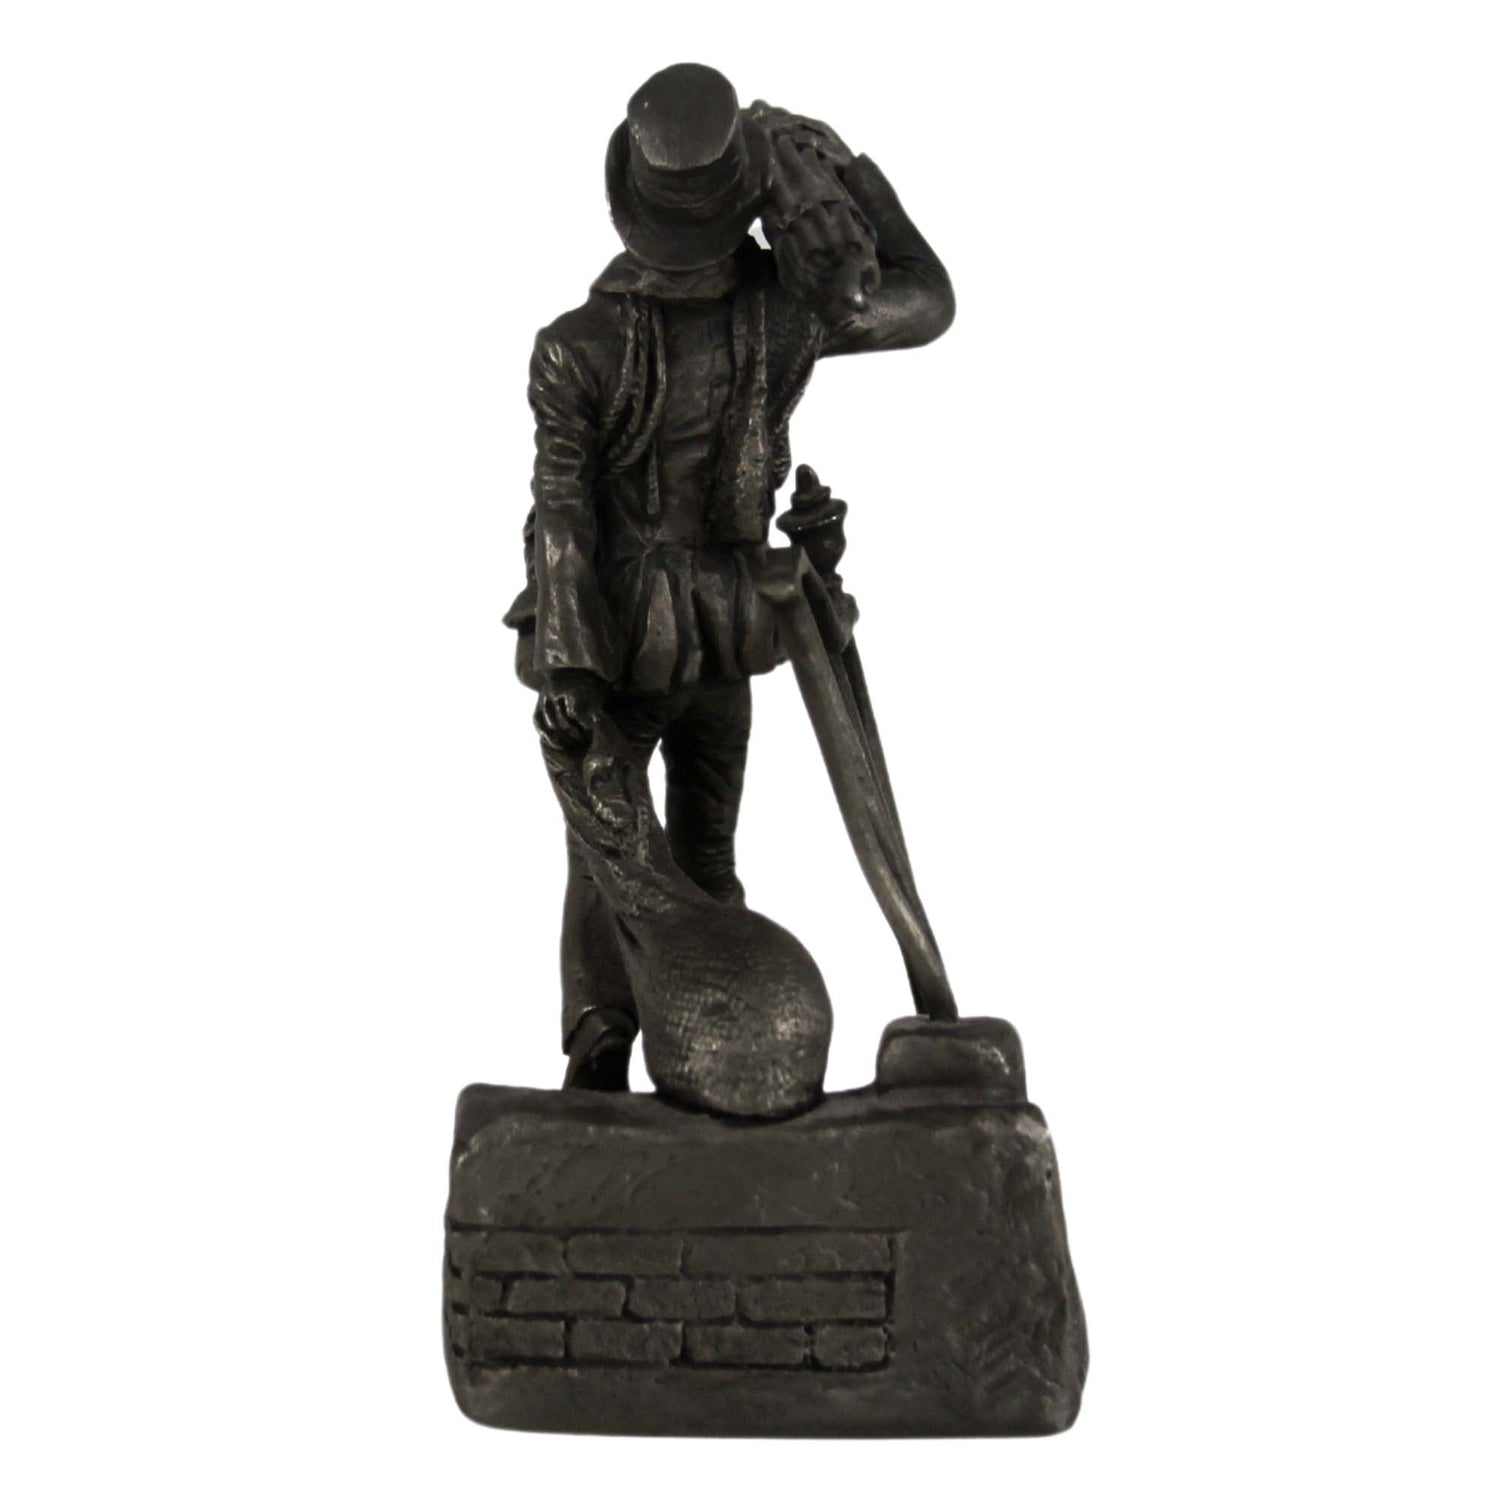 1977 Franklin Mint The Chimney Sweep Statue Back